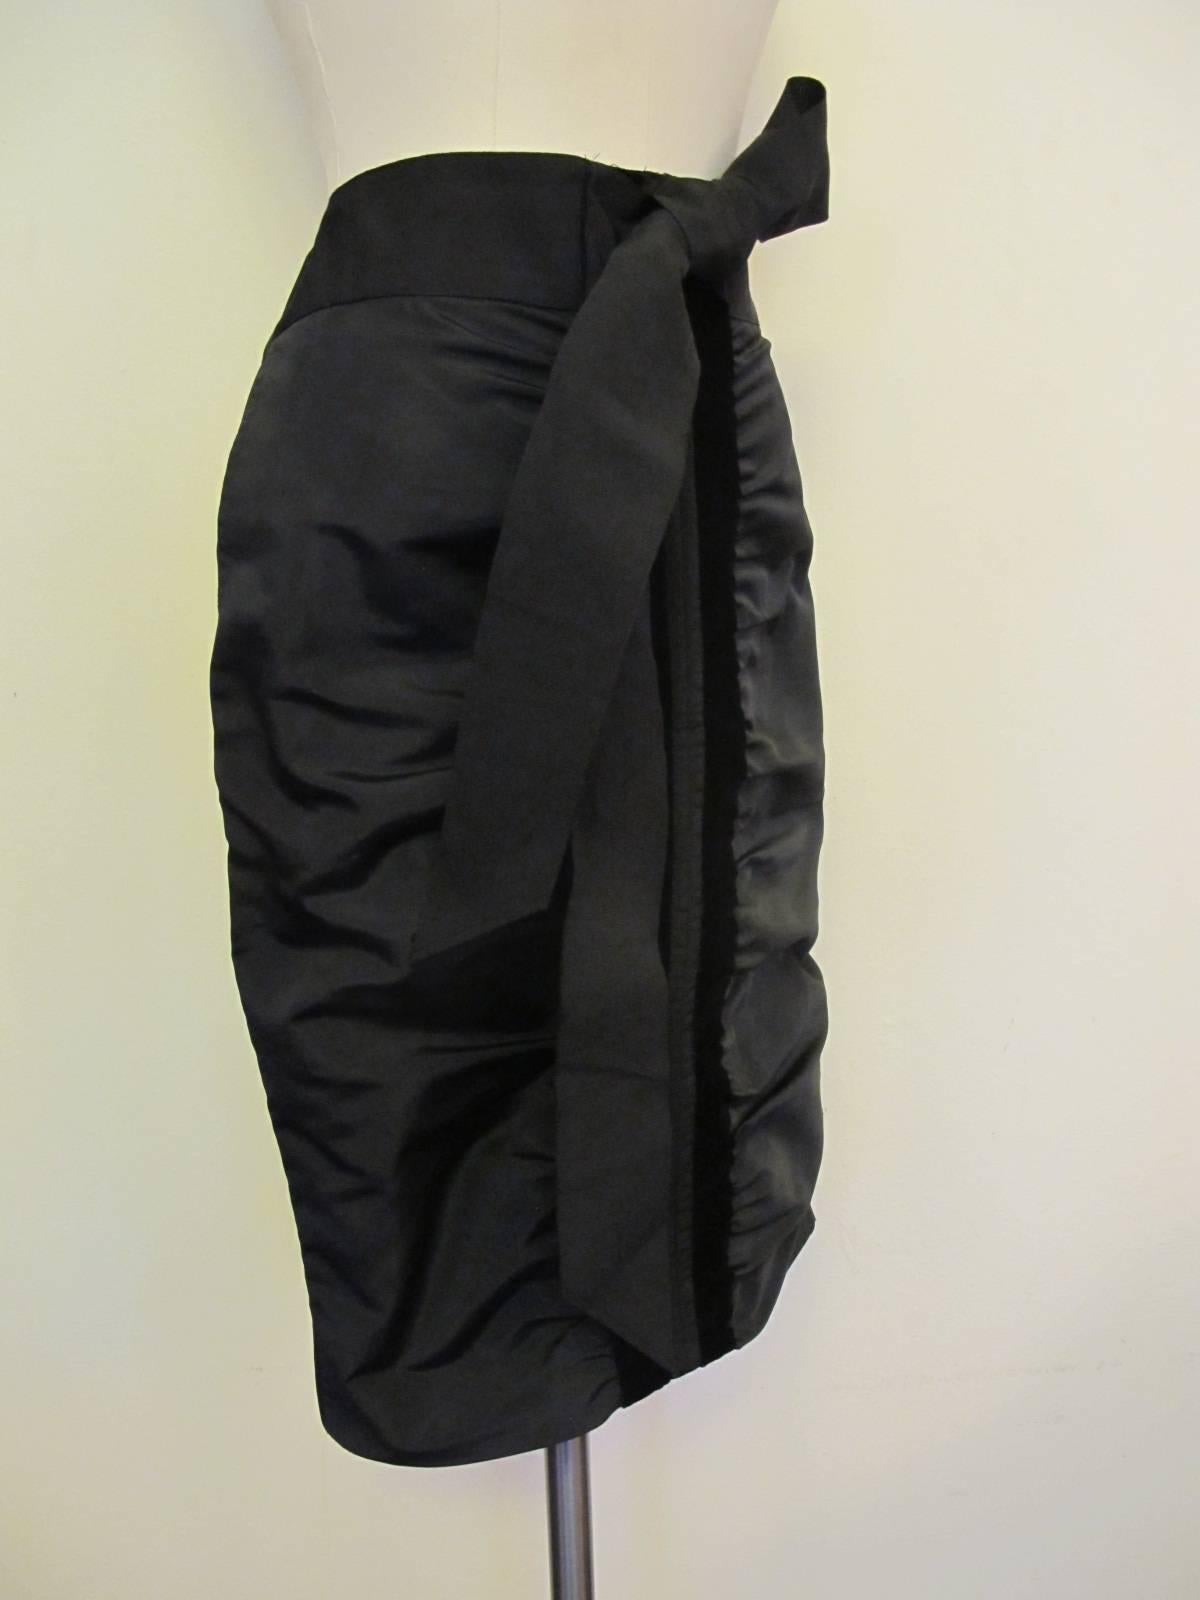 Chic Black taffeta skirt with gathered design trimmed in 1 1/16 inch velvet. The 2.5 inch gros grain belt is 29 inches long. There are two parts of the belt - totaling 58 inches - attached to the waist. There are two pockets. The front of the skirt